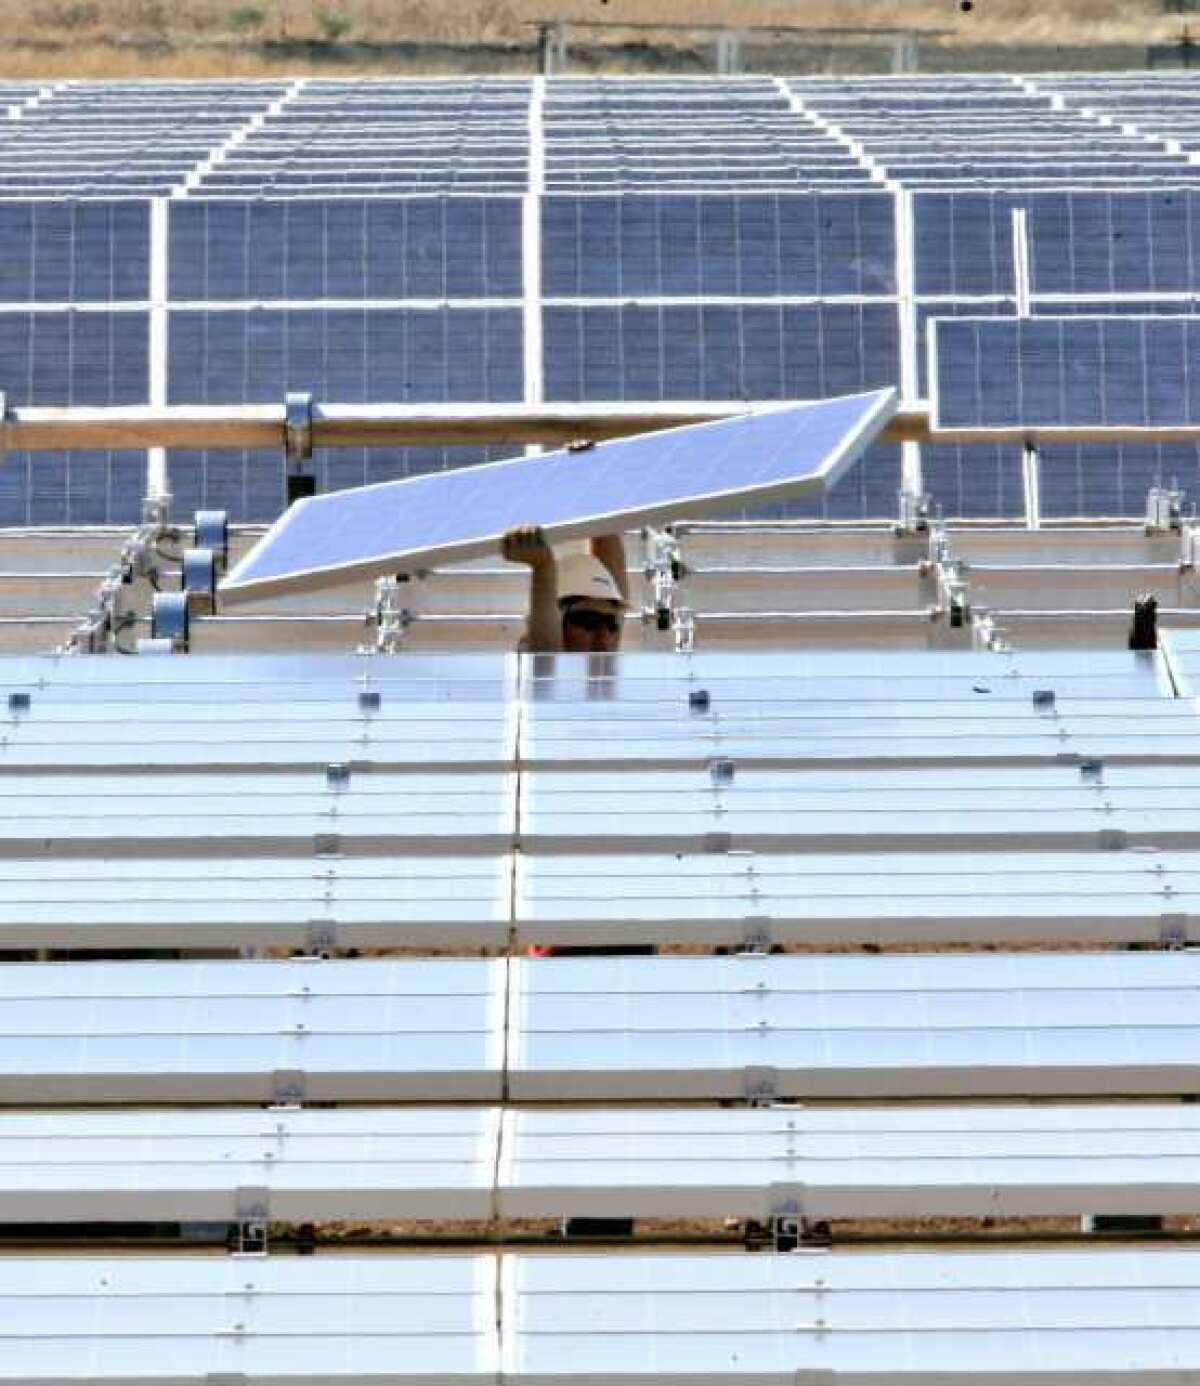 A solar energy panel is carried to be placed in a solar energy field under construction for the Sacramento Municipal Utility District.